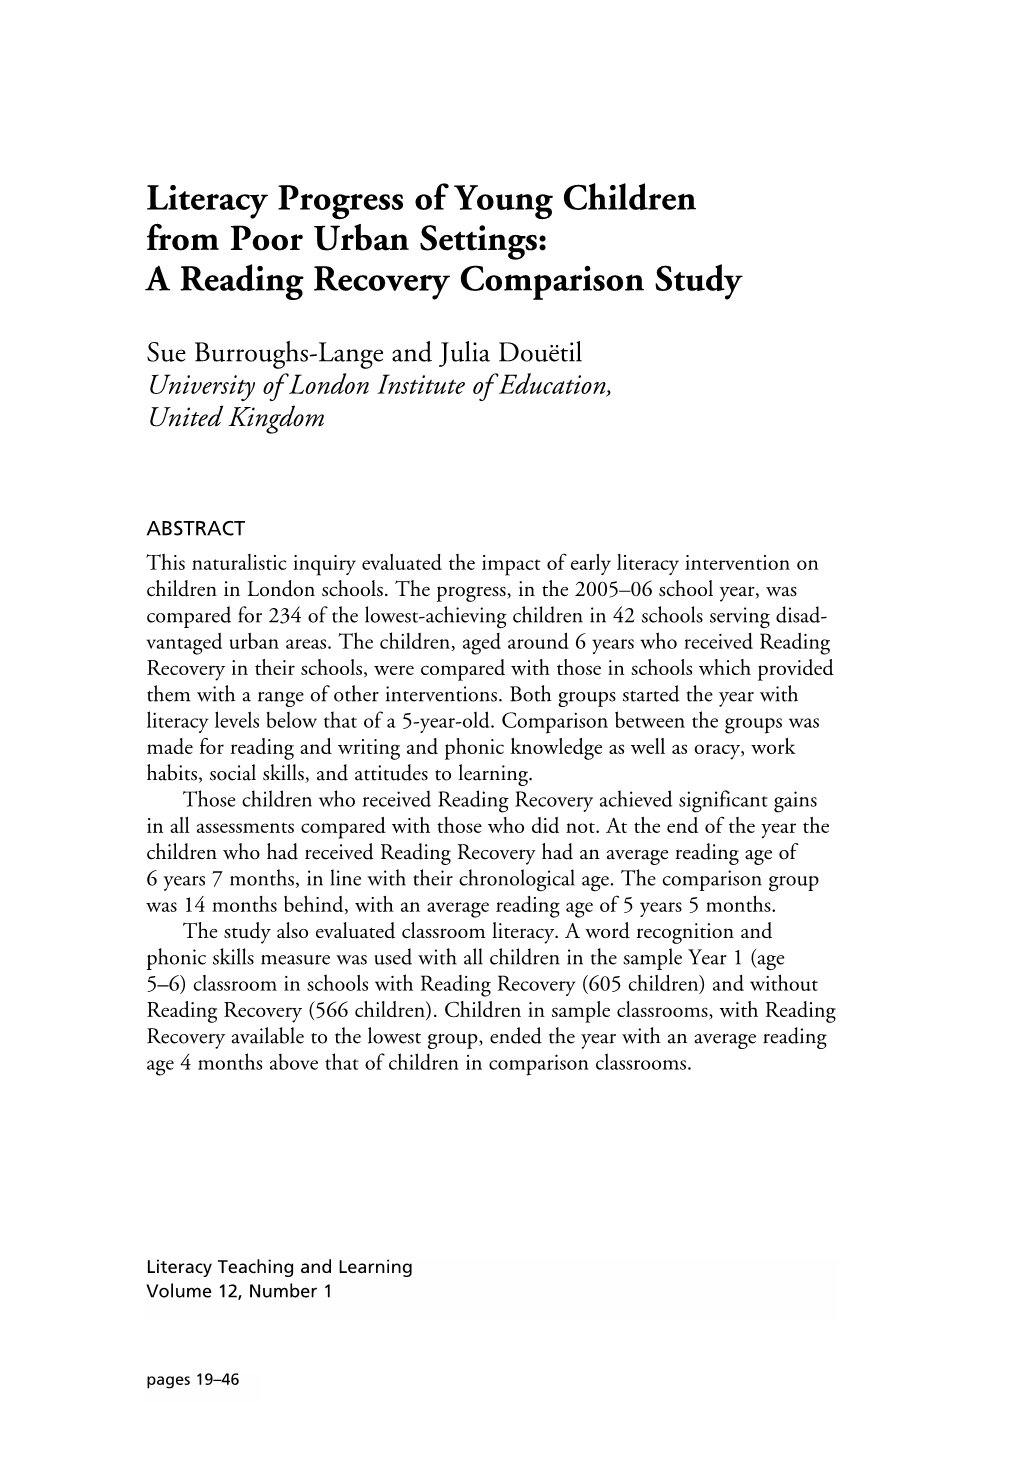 Literacy Progress of Young Children from Poor Urban Settings: a Reading Recovery Comparison Study